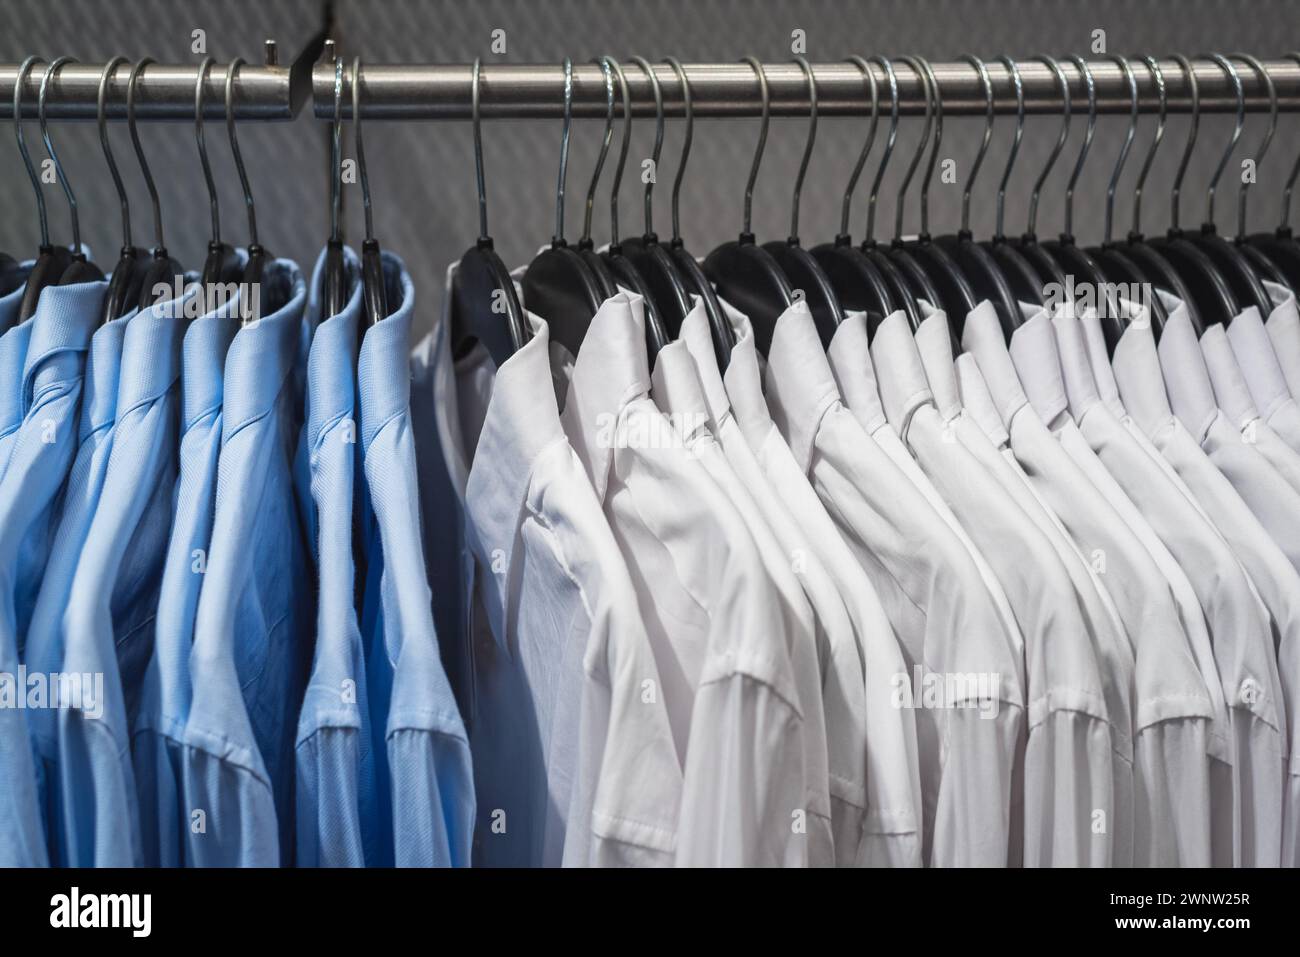 Blue and white shirts on hangers hanging on the rack Stock Photo